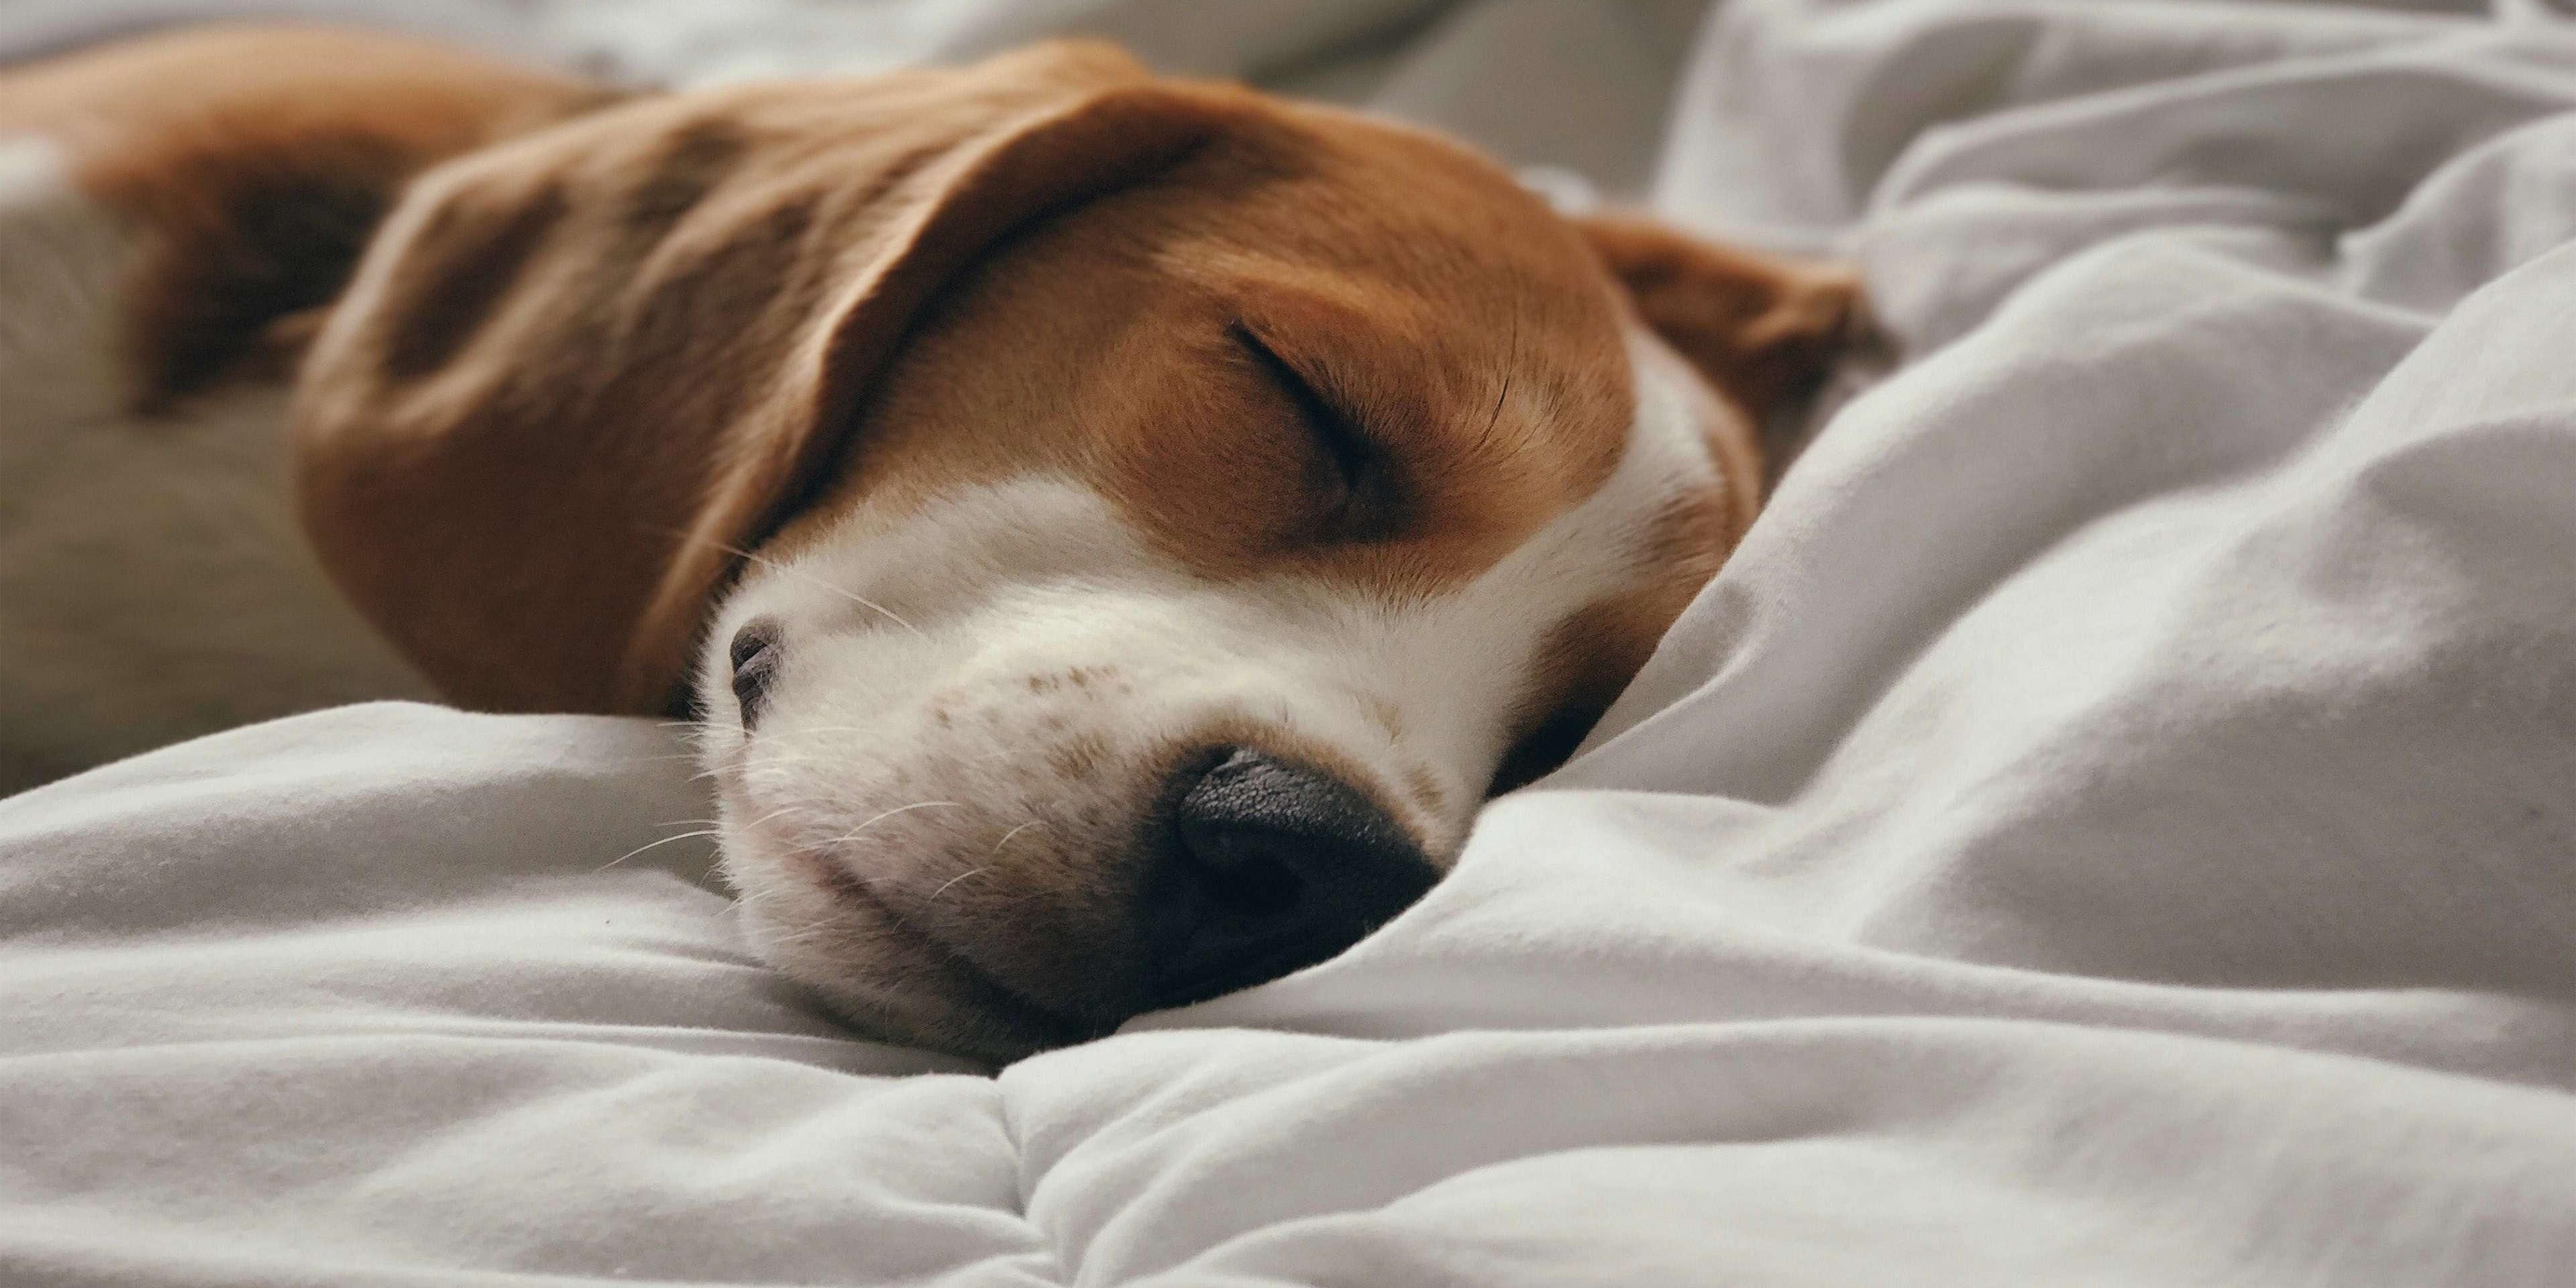 Pets are always welcome at the Avid Hotel Boston Logan Airport in Revere, MA with our pet friendly guest rooms featuring hard surface flooring for easy cleanup. Please call the hotel to inquire about our daily pet rate.  We look forward to showering your pet with love and attention!